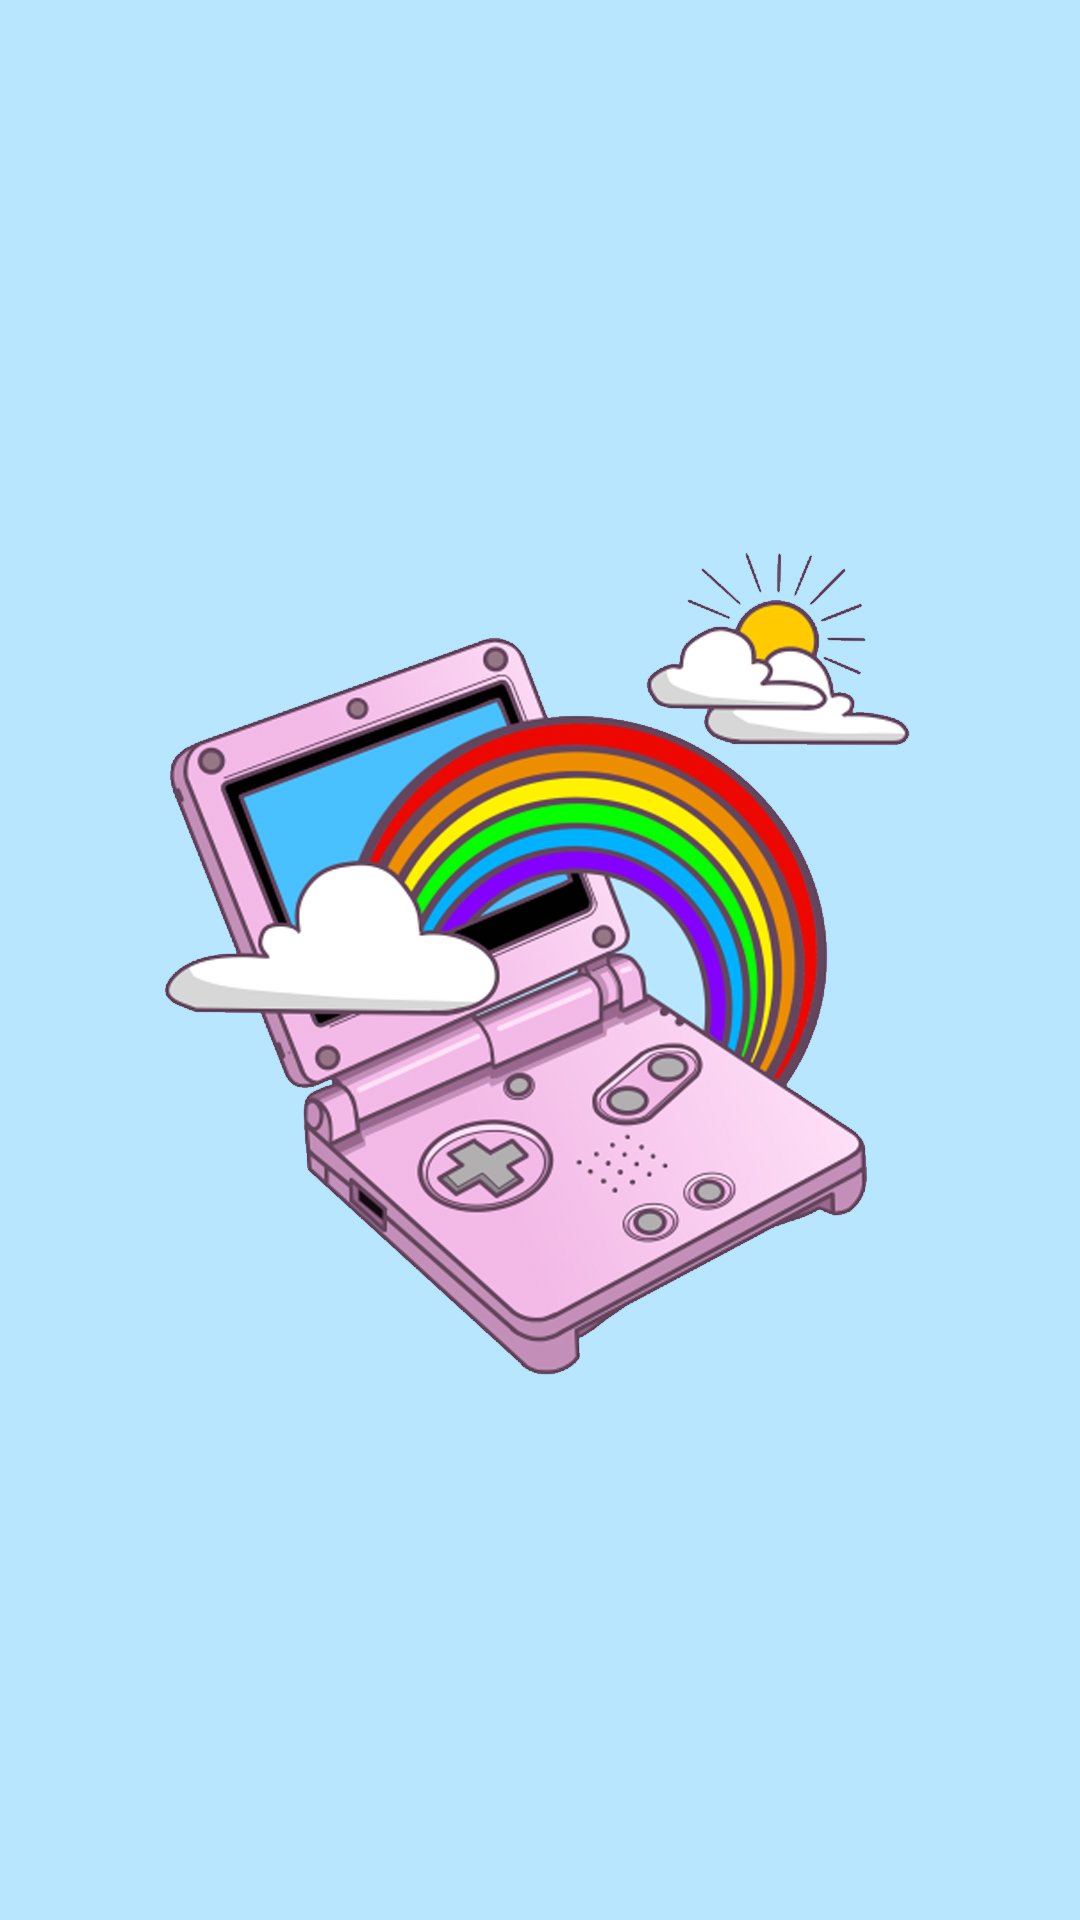 A pink Gameboy Advance with a rainbow and clouds - Funny